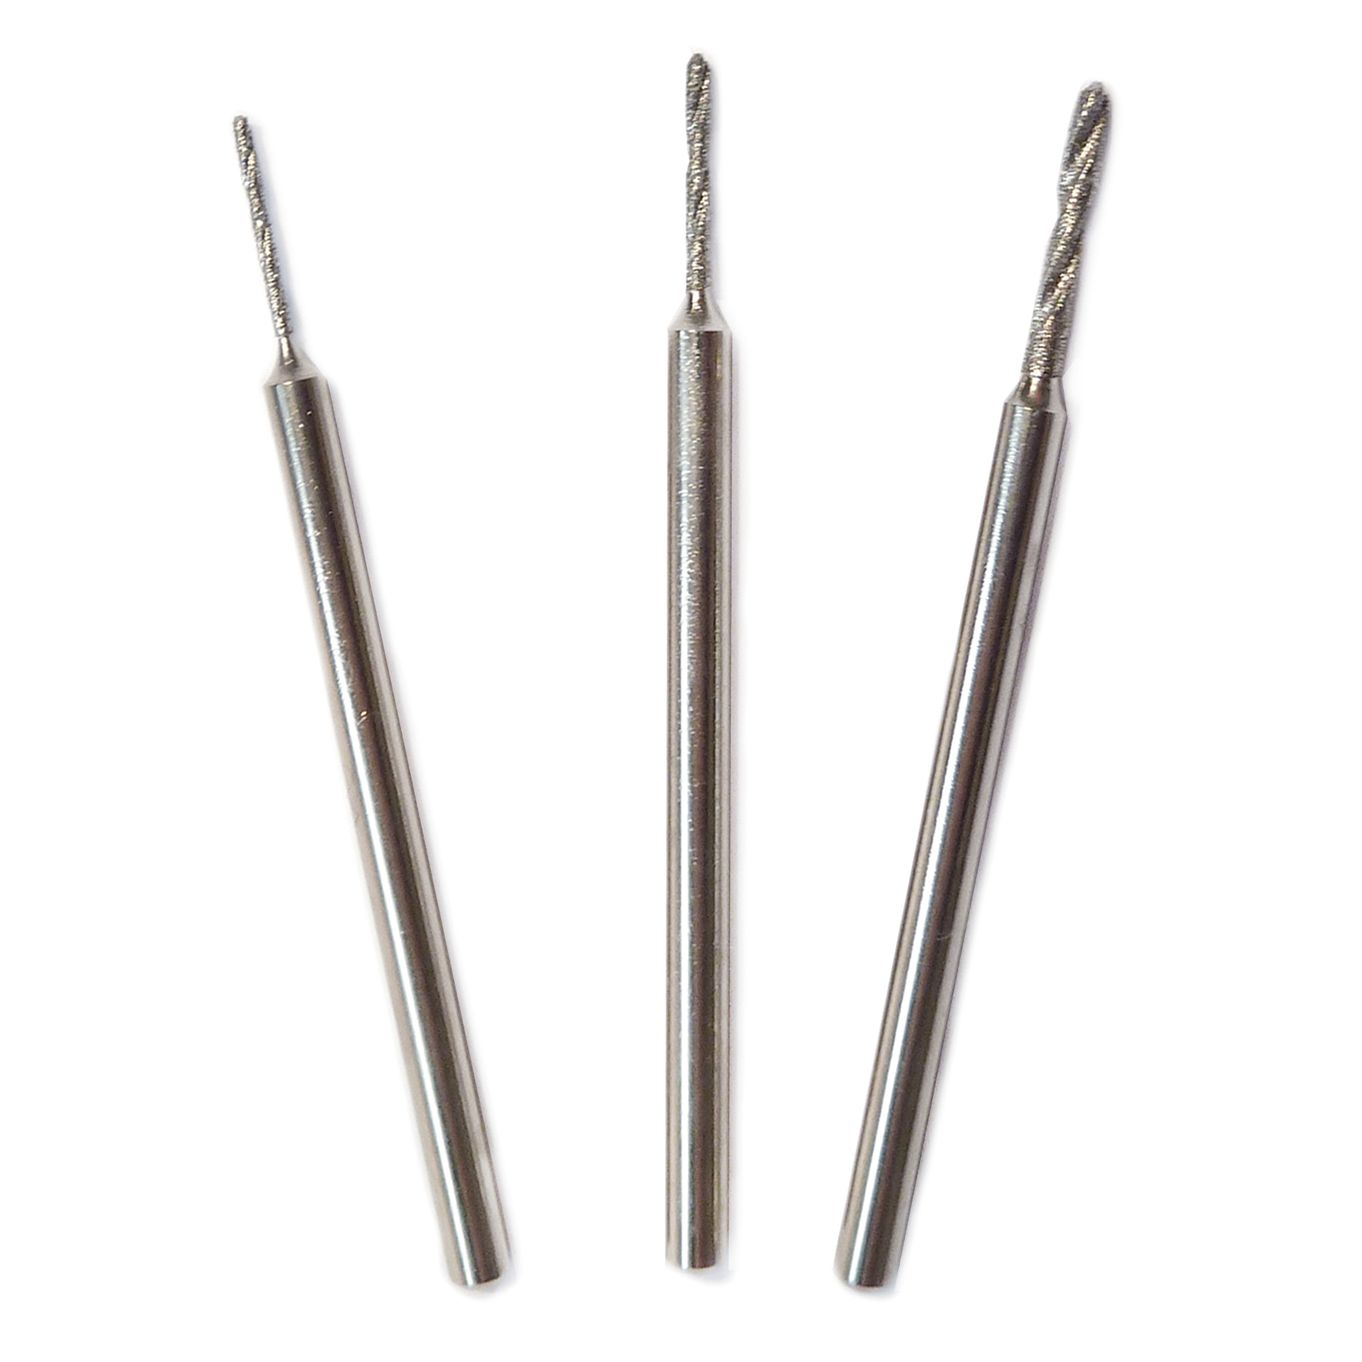 Diamond Tipped Bead Reamer CSNSD 2 Sets Beading Hole Enlarger Tool for DIY Jewelry  Making Bead Reamer Set